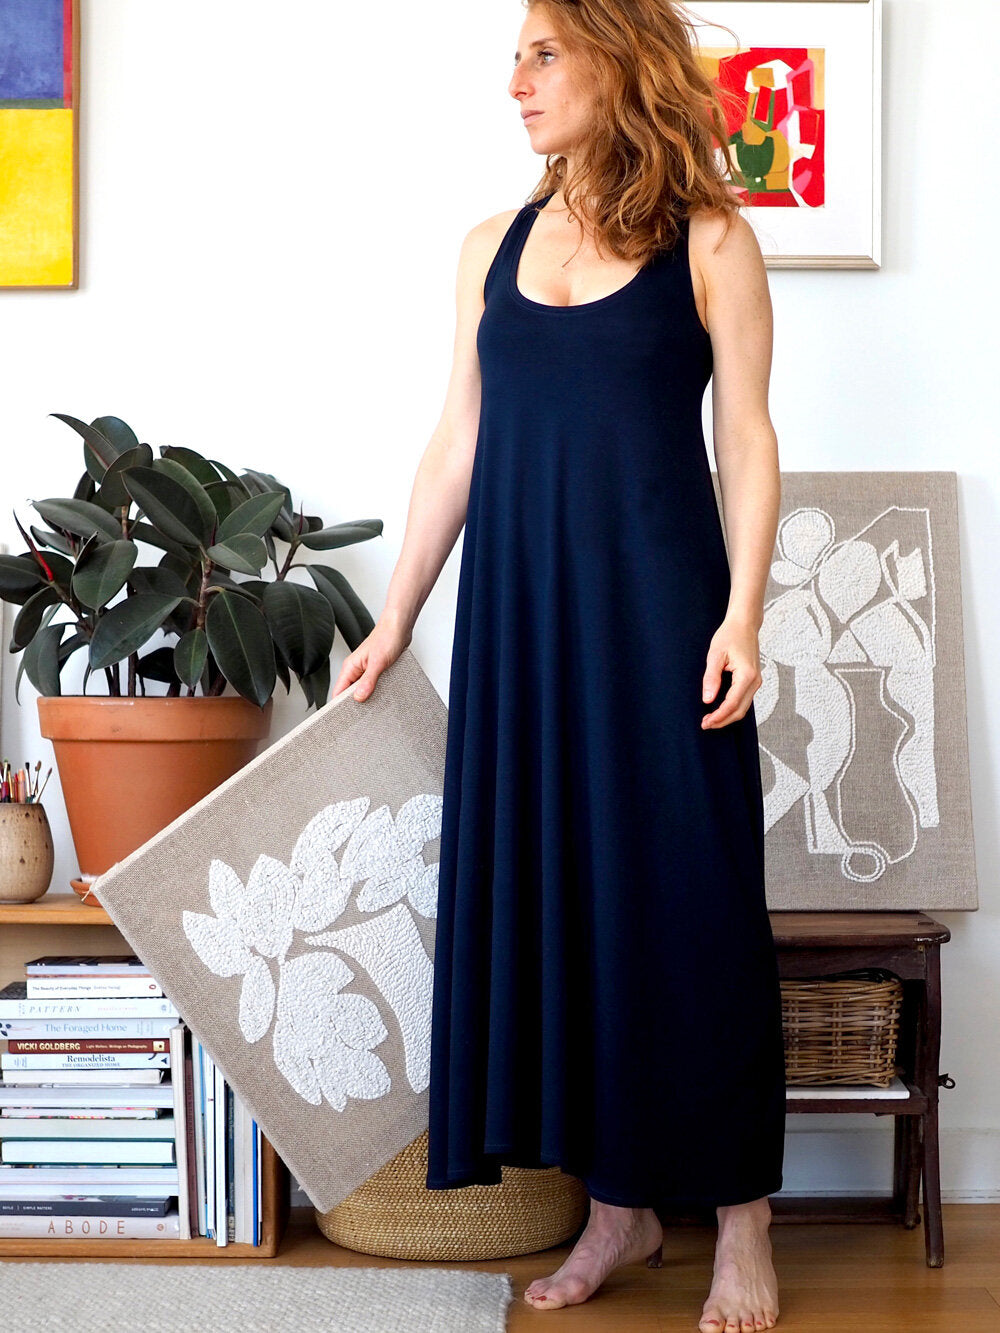 Woman wearing the Rumi Tank Dress sewing pattern by Christine Haynes. A sleeveless dress pattern made in cotton, silk, rayon, bamboo or linen knit fabrics, featuring a racer back, deep scoop neck, fitted through the upper body and bust, then flares to an 